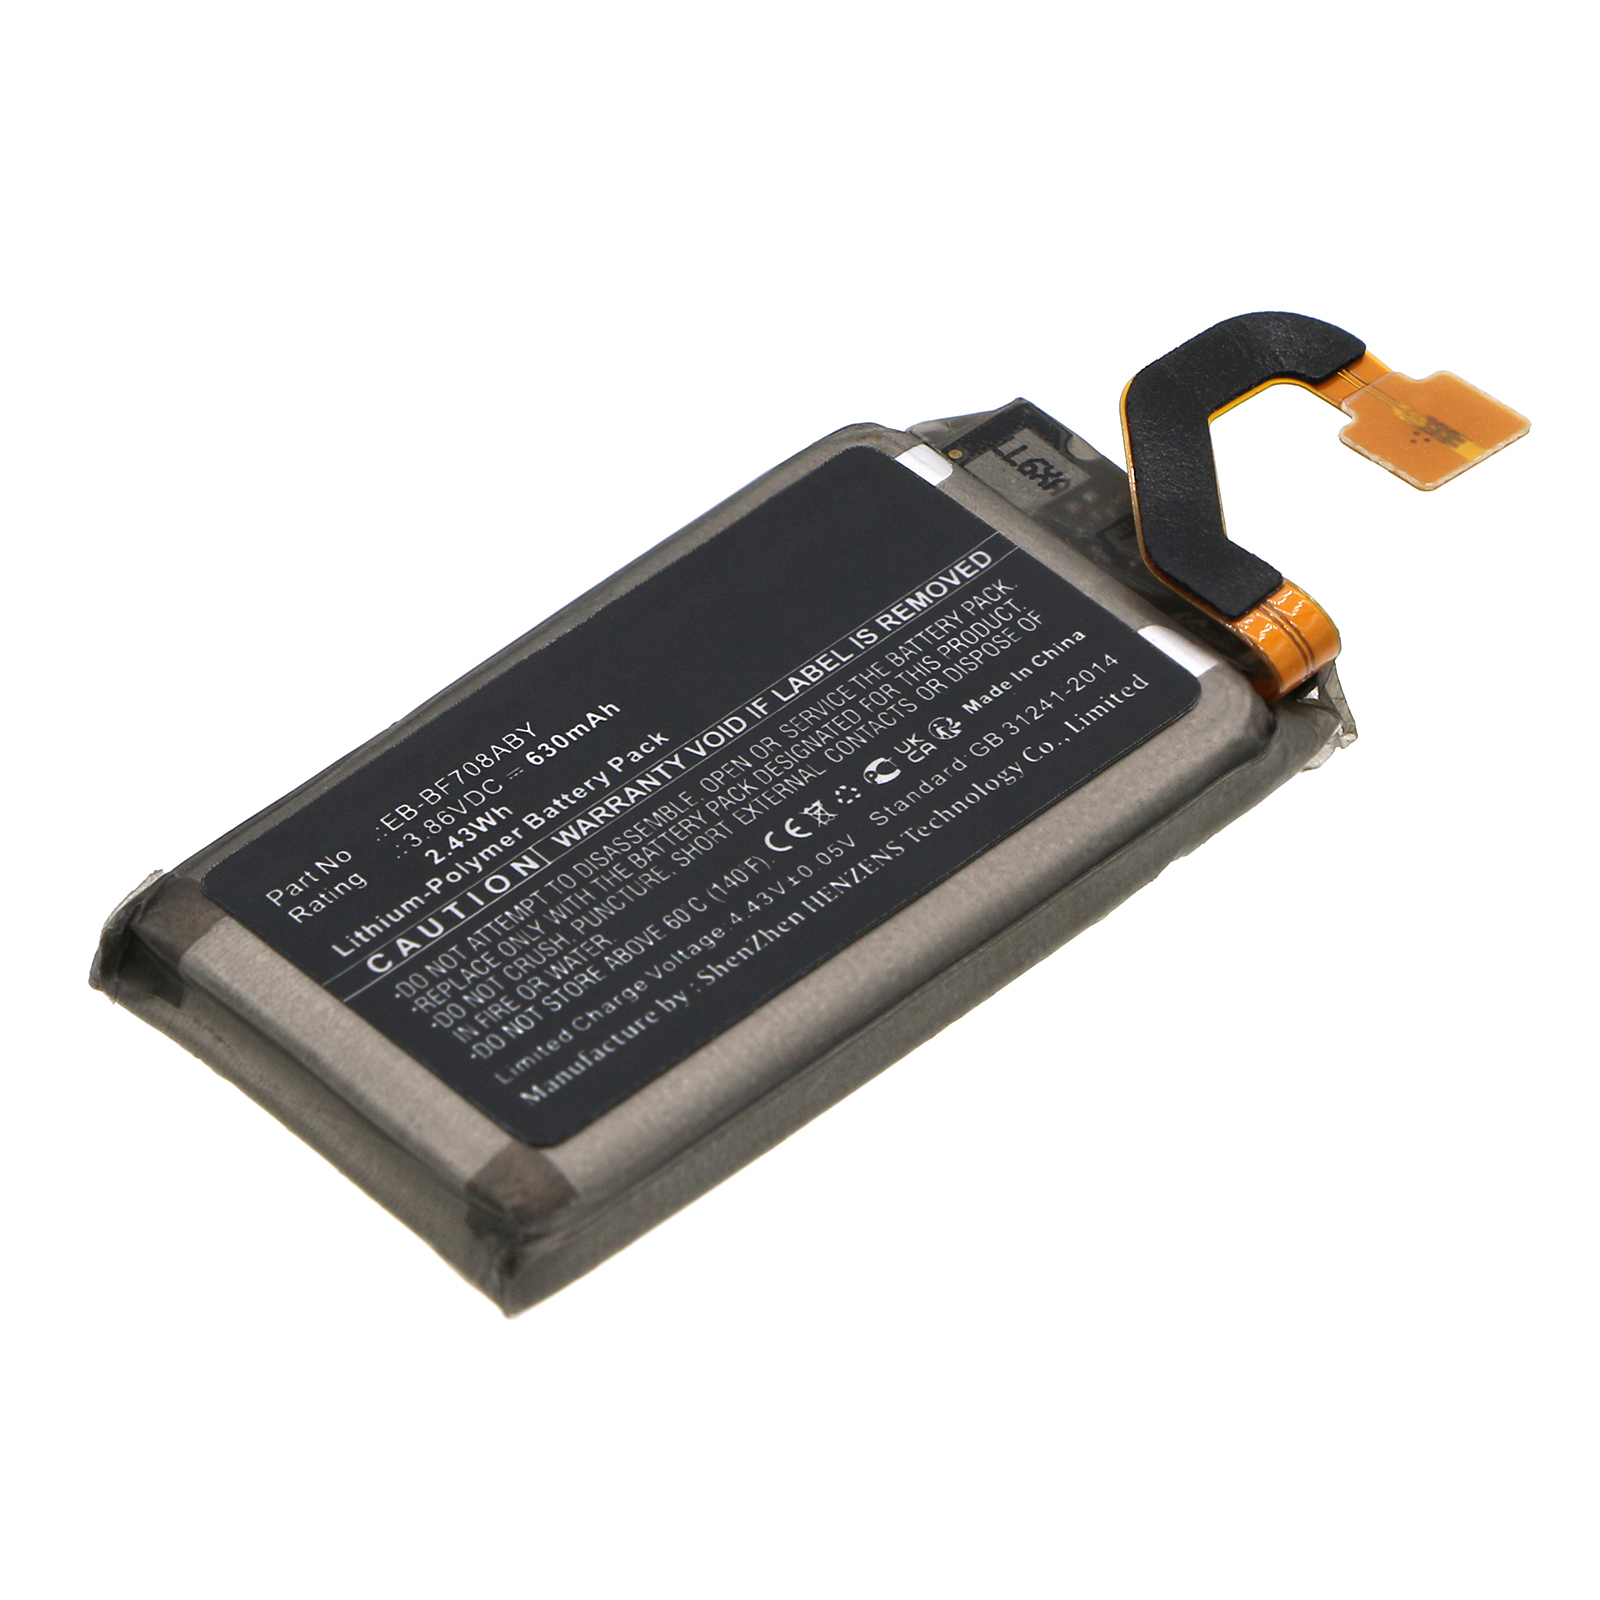 Synergy Digital Cell Phone Battery, Compatible with Samsung EB-BF708ABY Cell Phone Battery (Li-Pol, 3.86V, 630mAh)